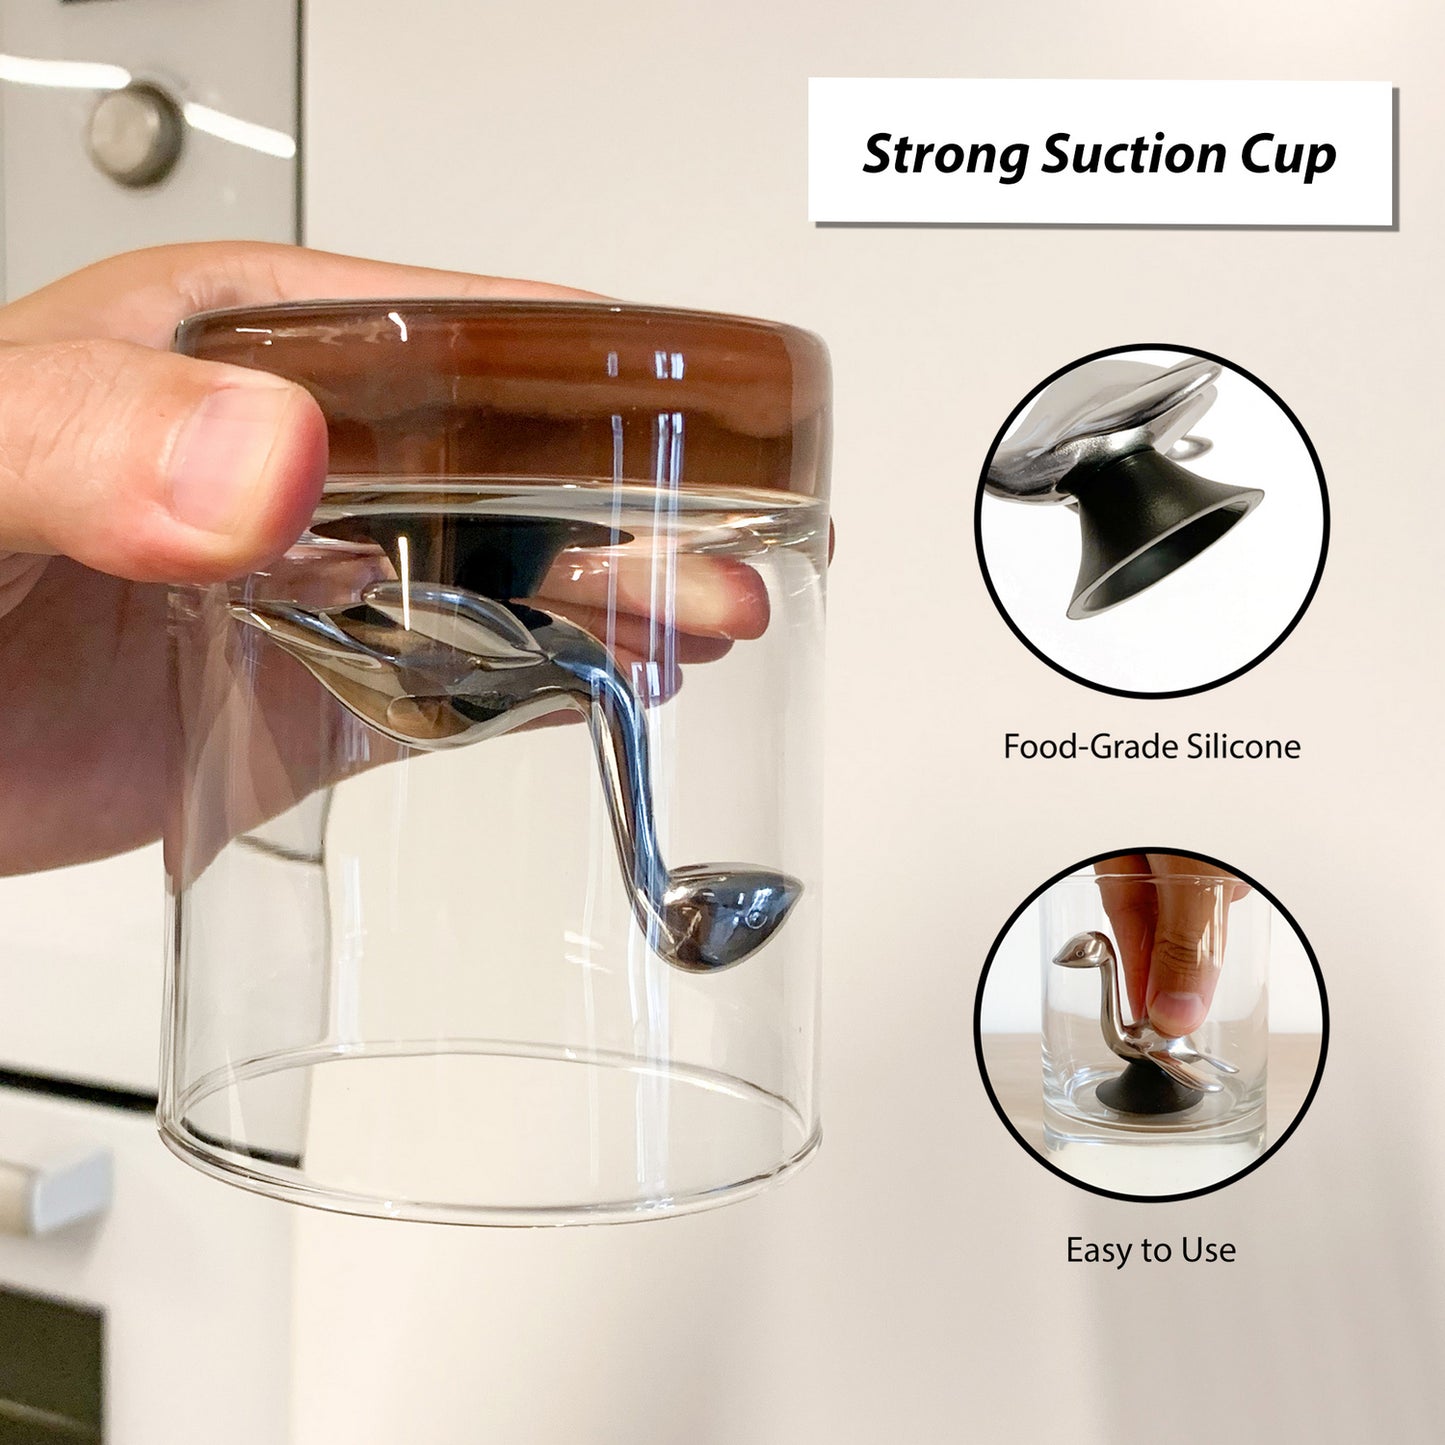 Scotch Ness Critter Whisky Stone has a Strong Silicone Suction Cup and is Easy to Use